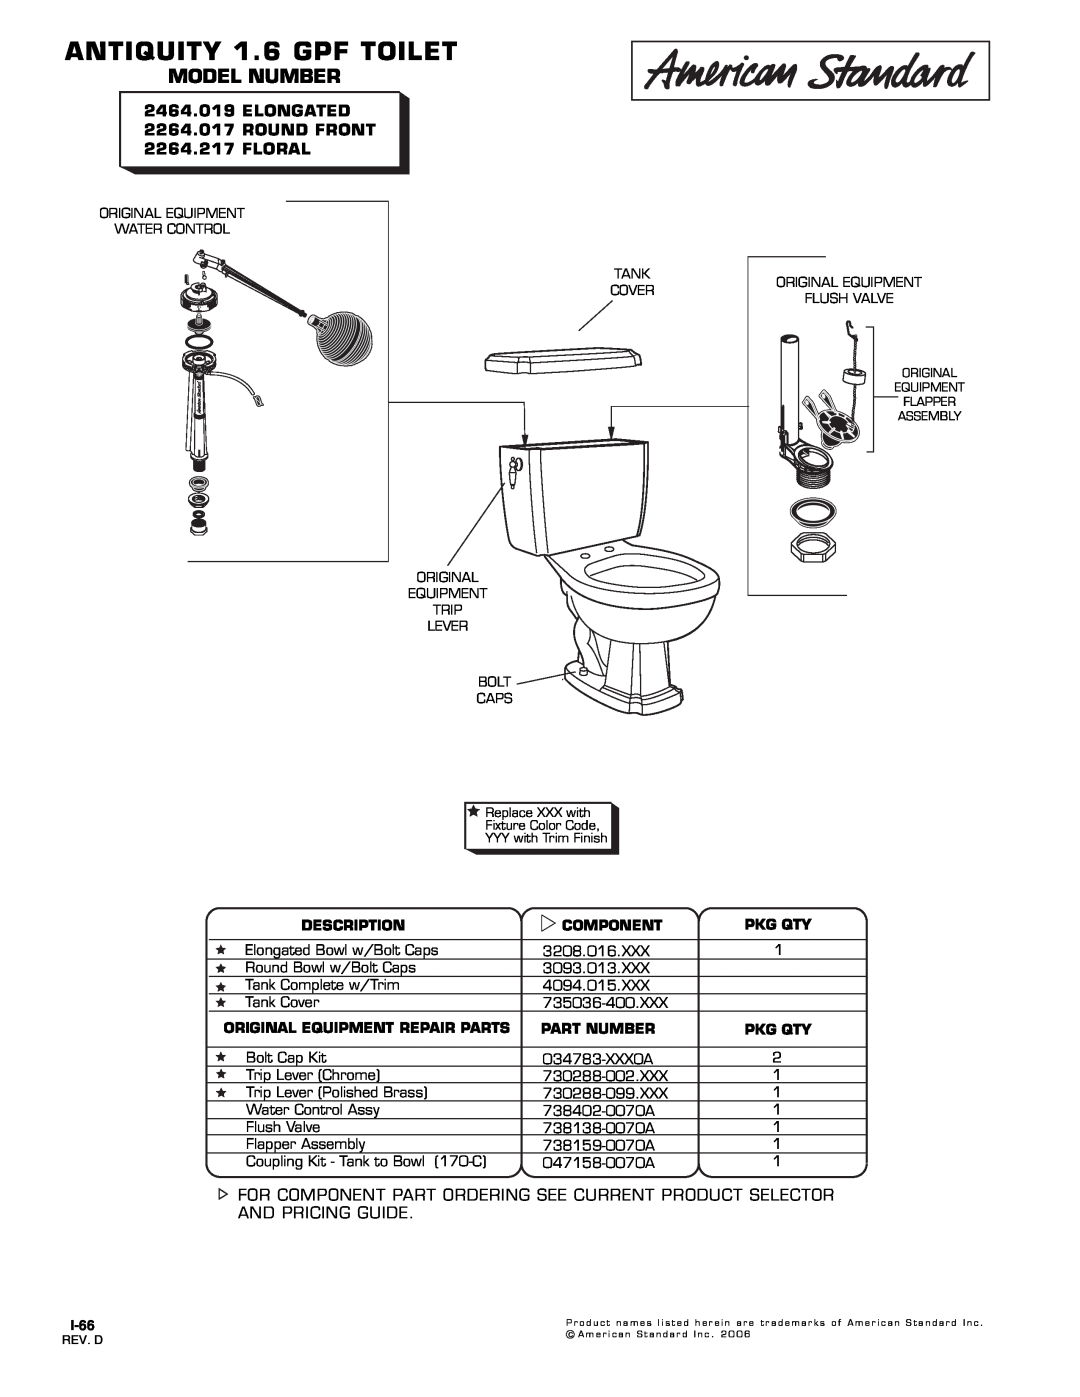 American Standard 2264.217 manual ANTIQUITY 1.6 GPF TOILET, Model Number, ELONGATED 2264.017 ROUND FRONT, Floral, Pkg Qty 